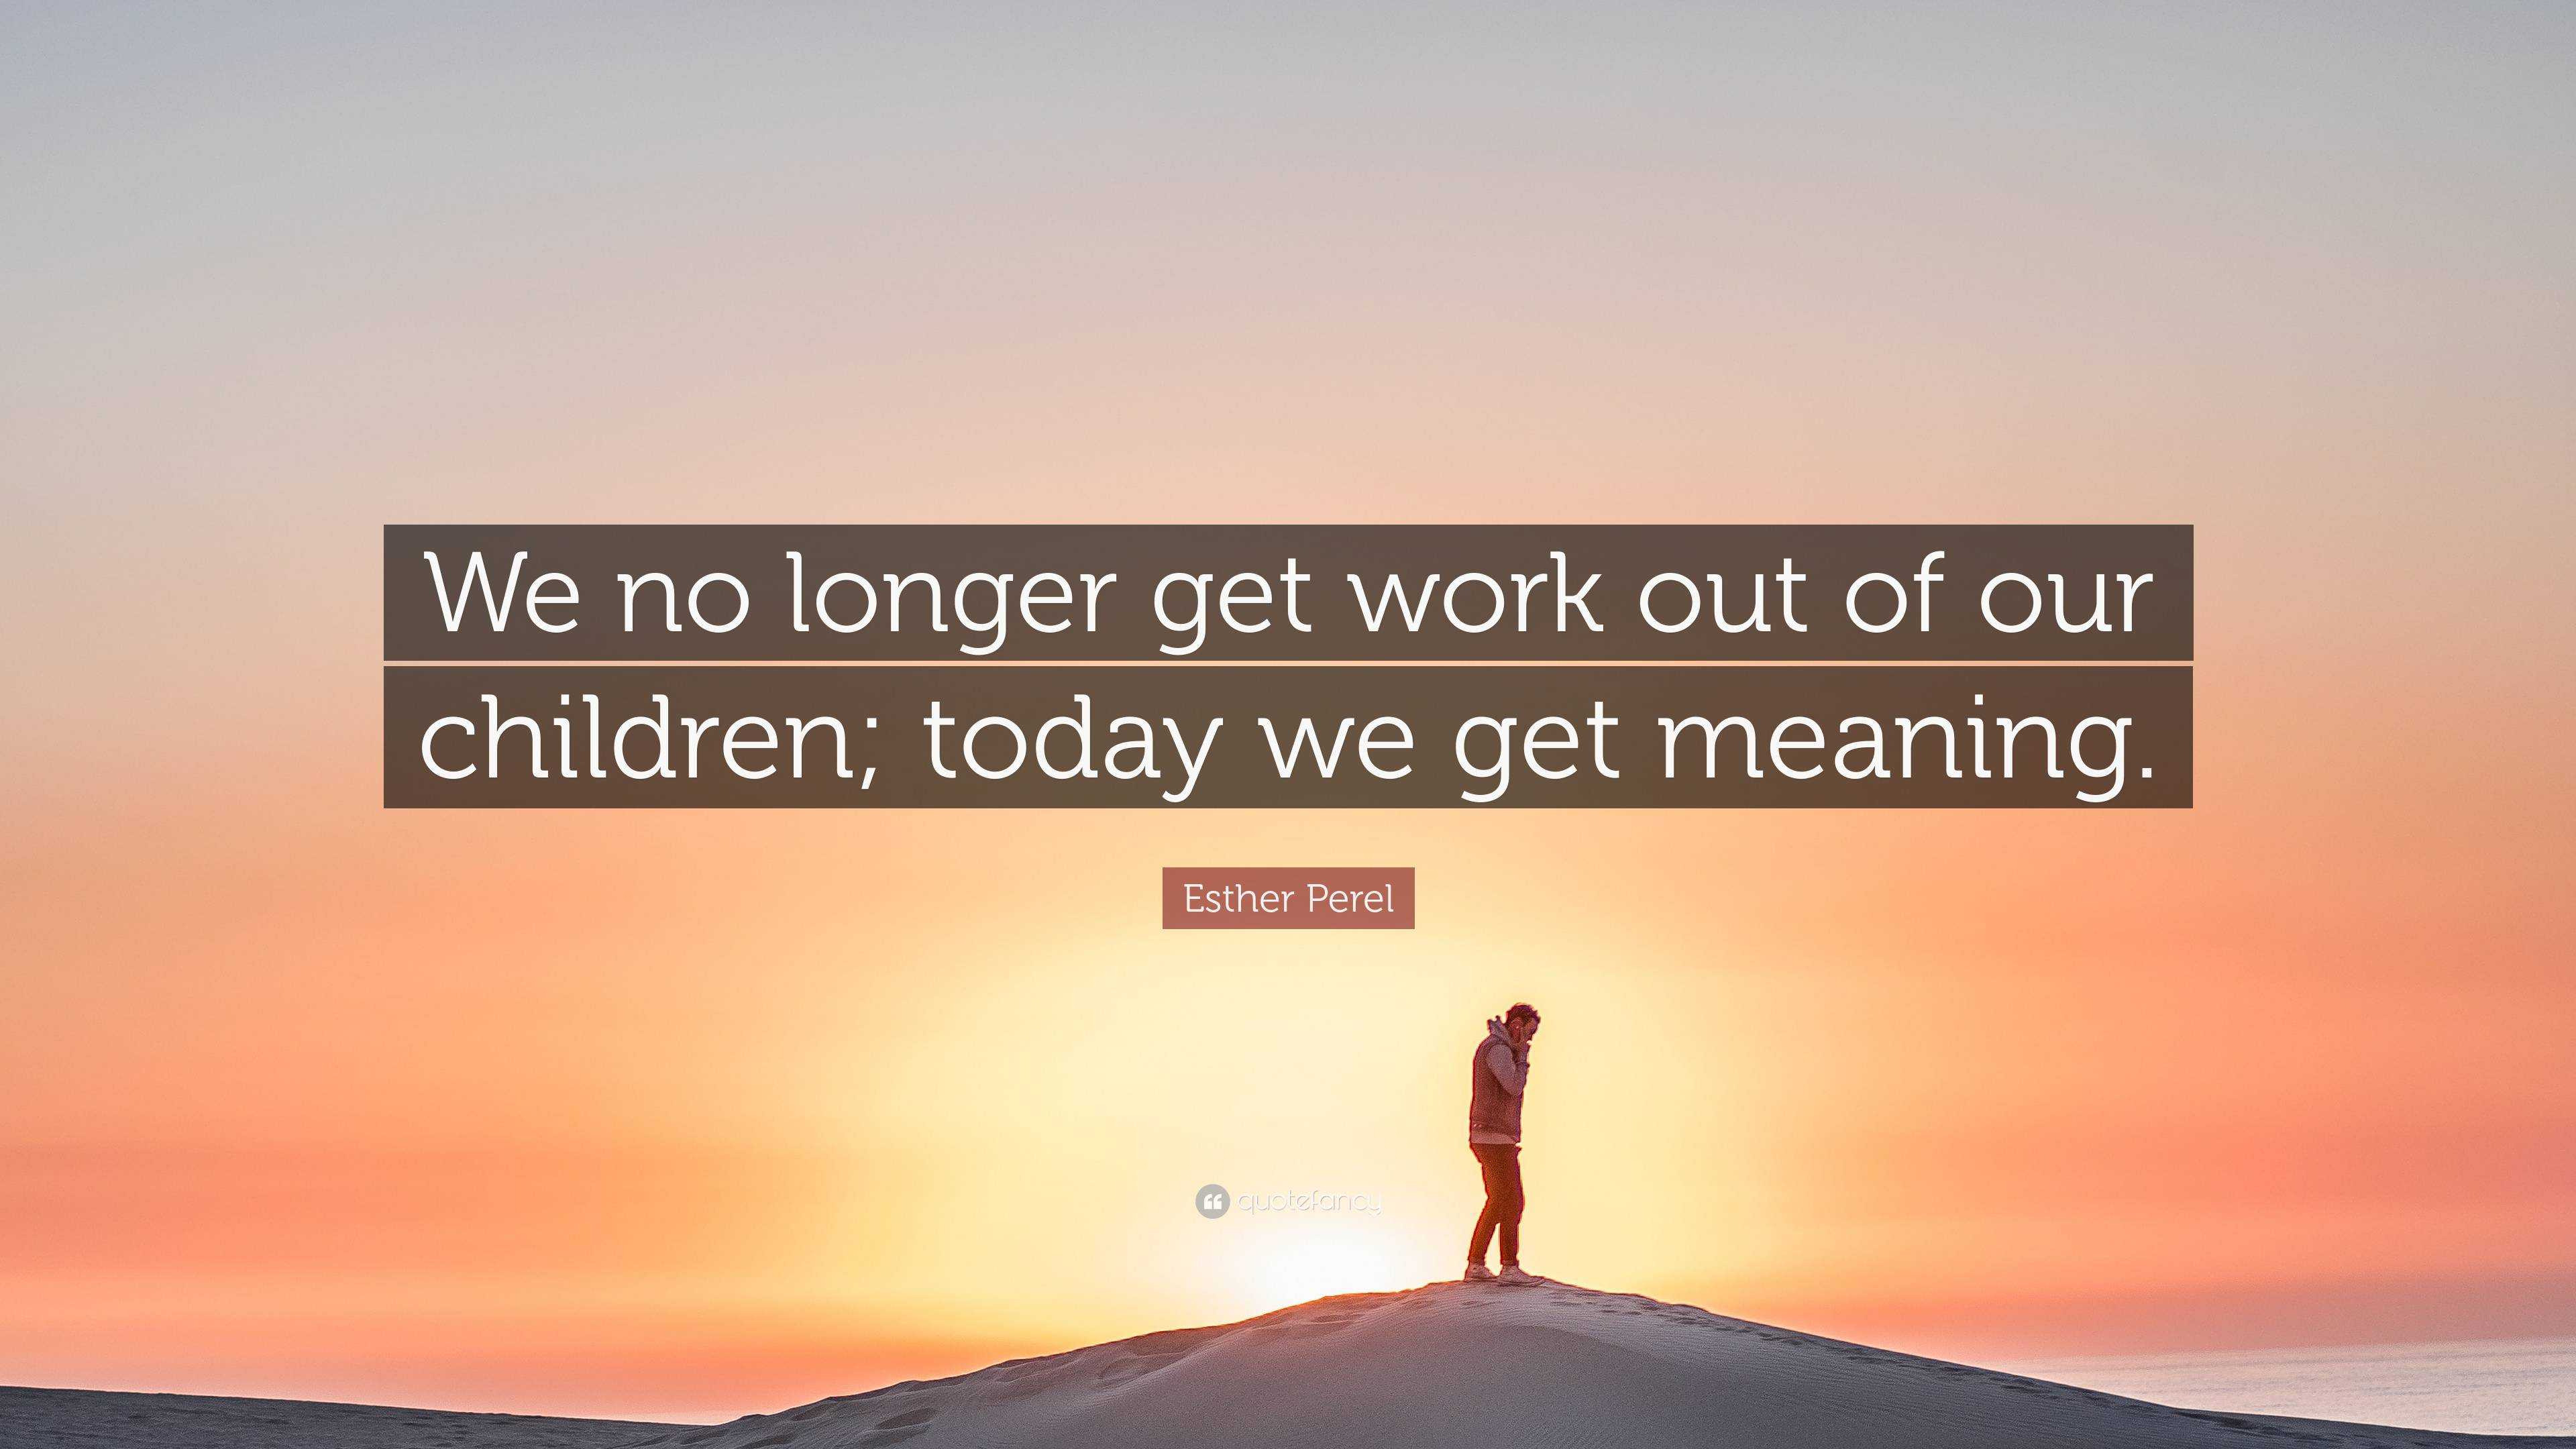 https://quotefancy.com/media/wallpaper/3840x2160/6607052-Esther-Perel-Quote-We-no-longer-get-work-out-of-our-children-today.jpg